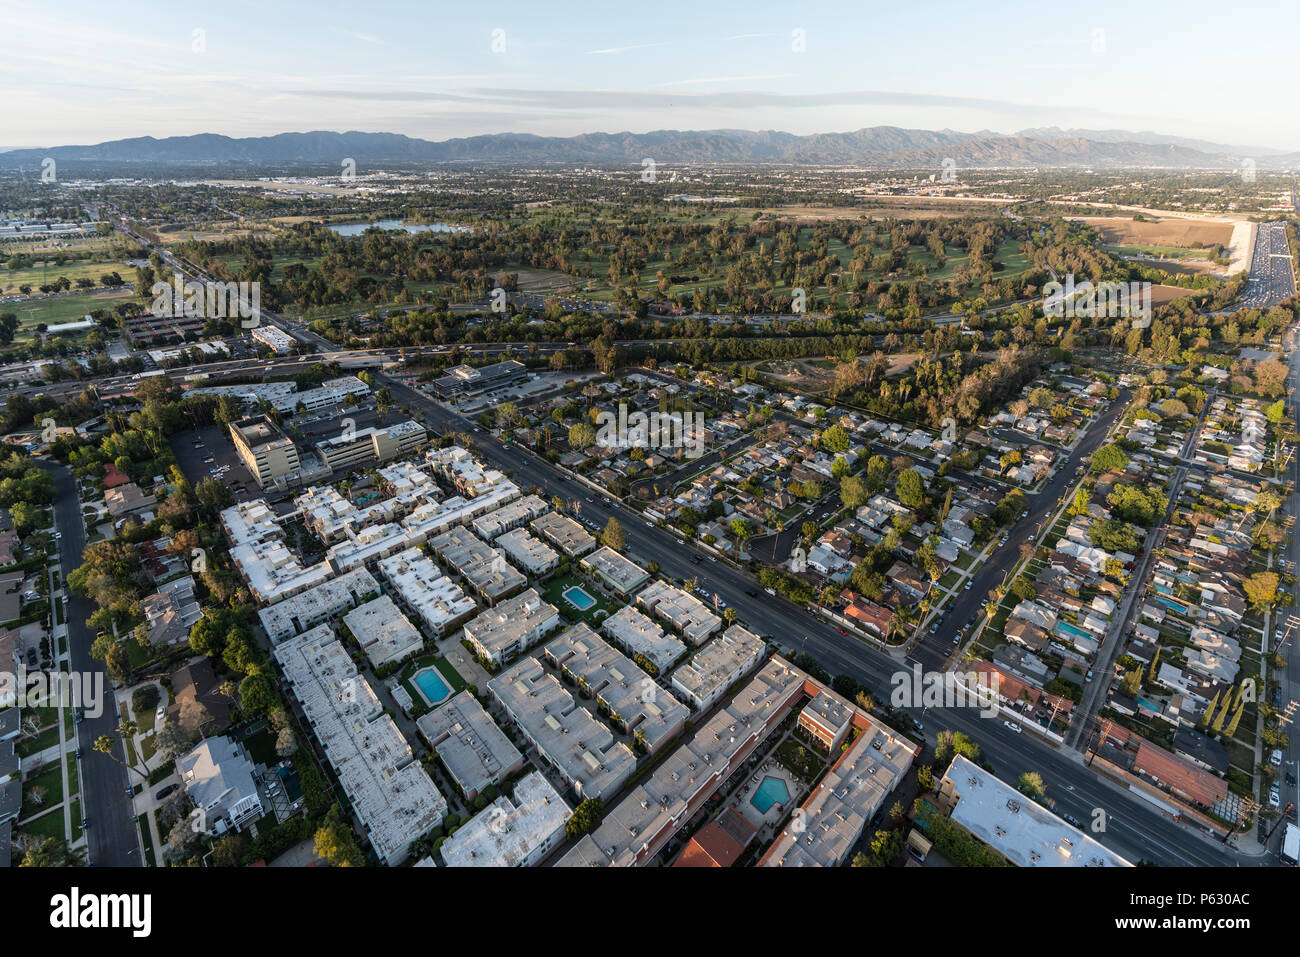 Afternoon aerial view towards the Sepulveda basin in the Encino area of the San Fernando Valley in Los Angeles, California. Stock Photo